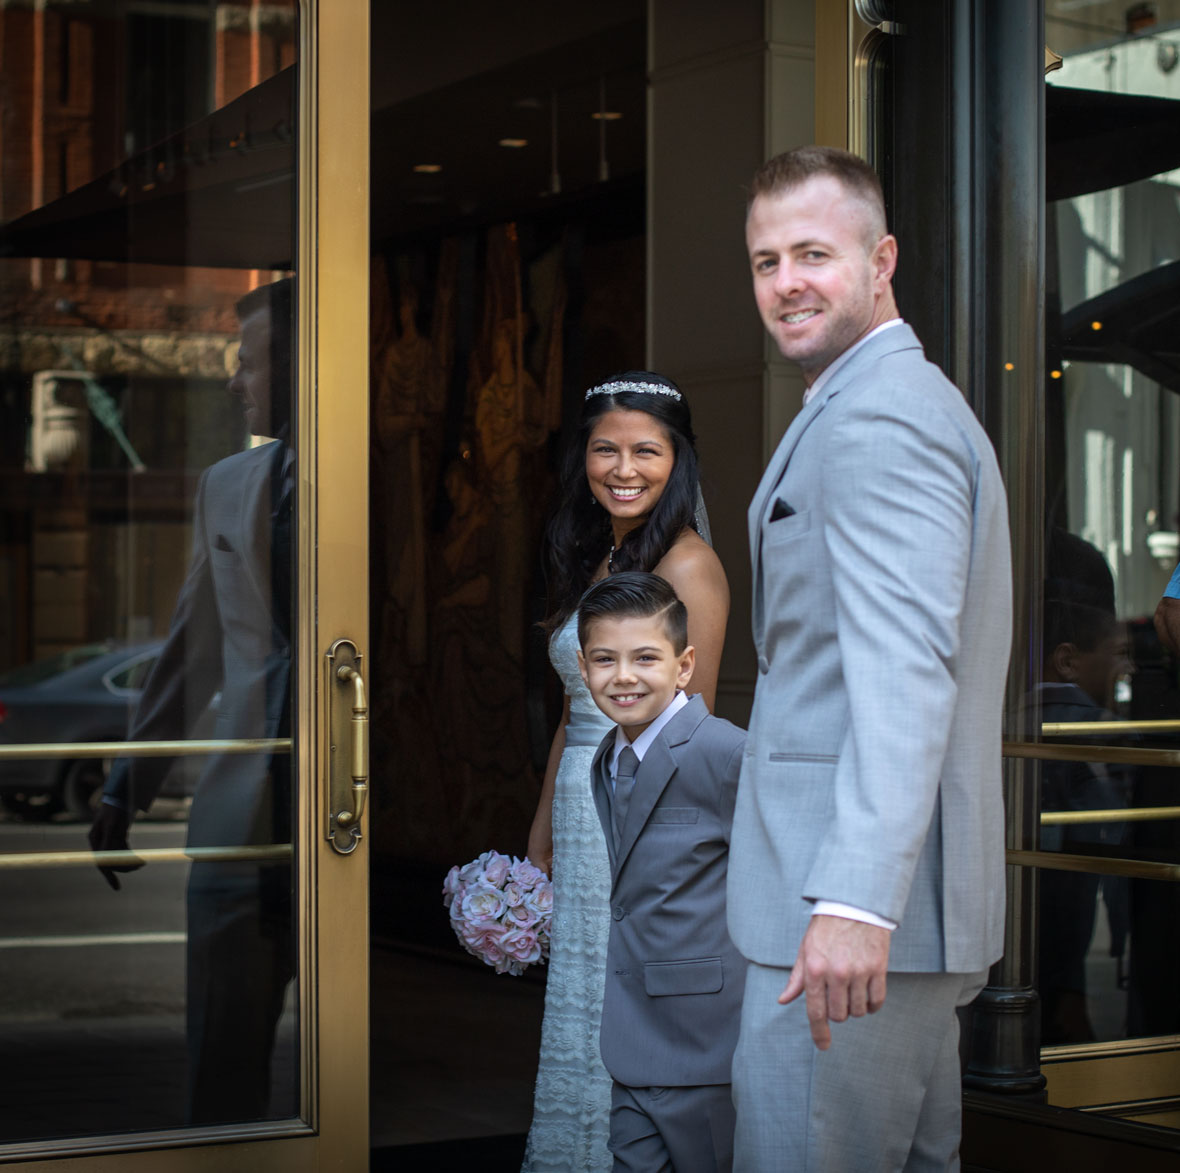 The Joule Hotel in Dallas Texas | Wedding Photographer | Pamela Kay Photography